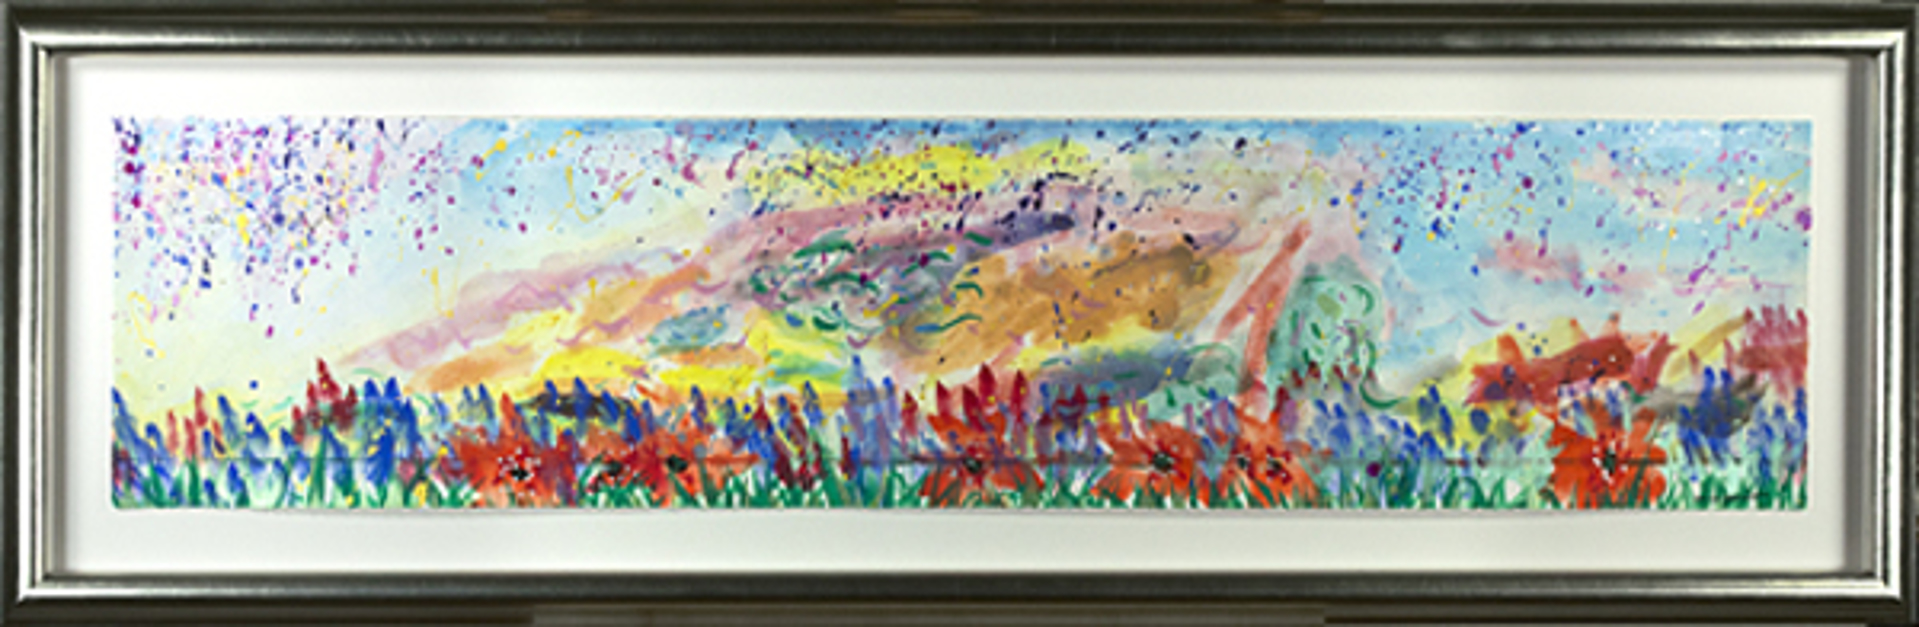 Abstract with Grass and Poppies II by David Barnett